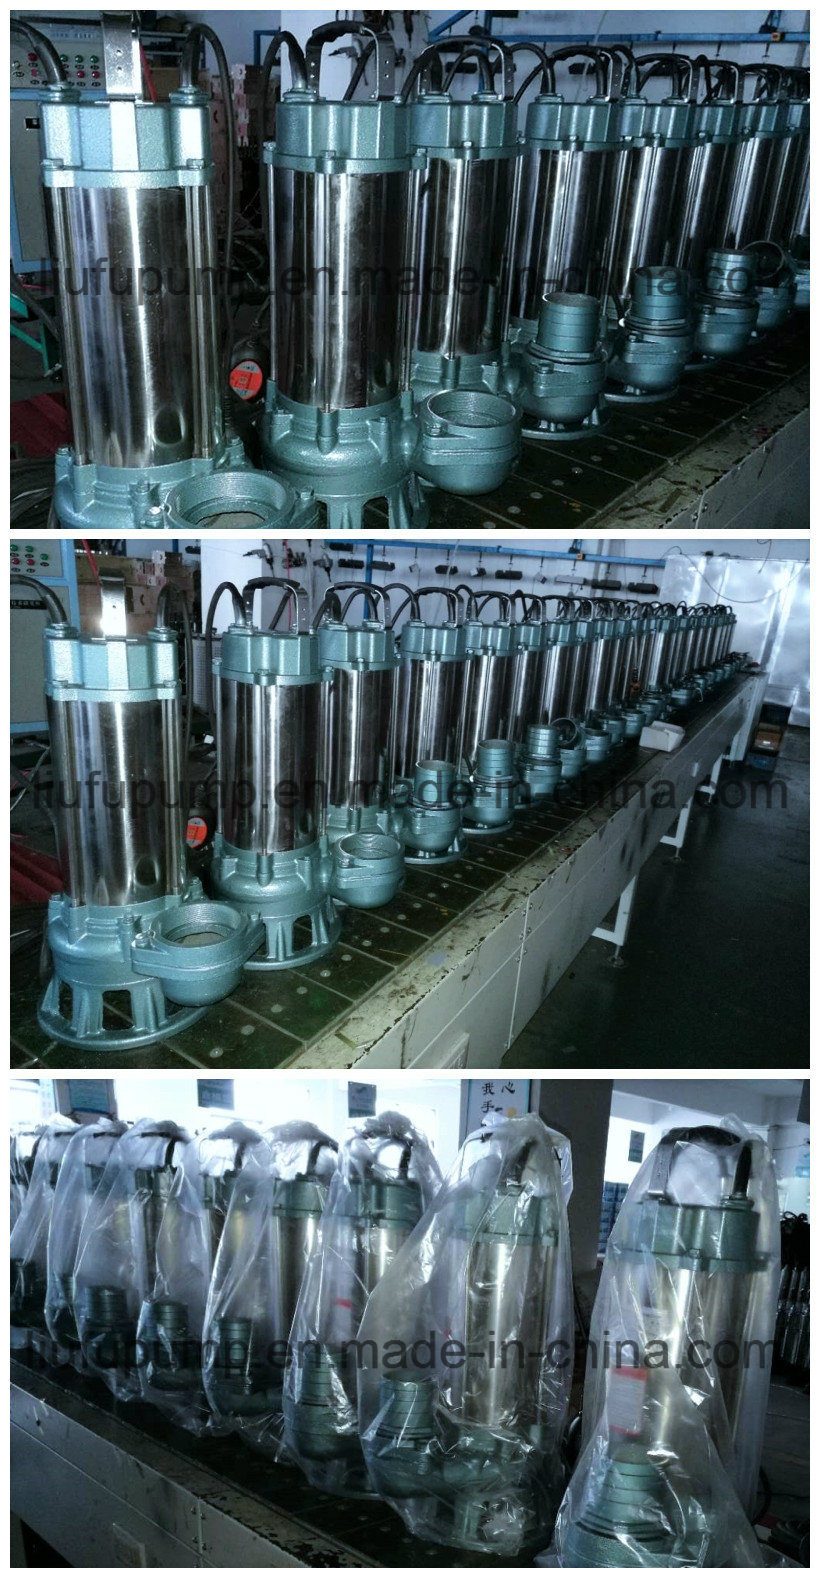 Stainless Steel Sewage Submersible Pump with Floating